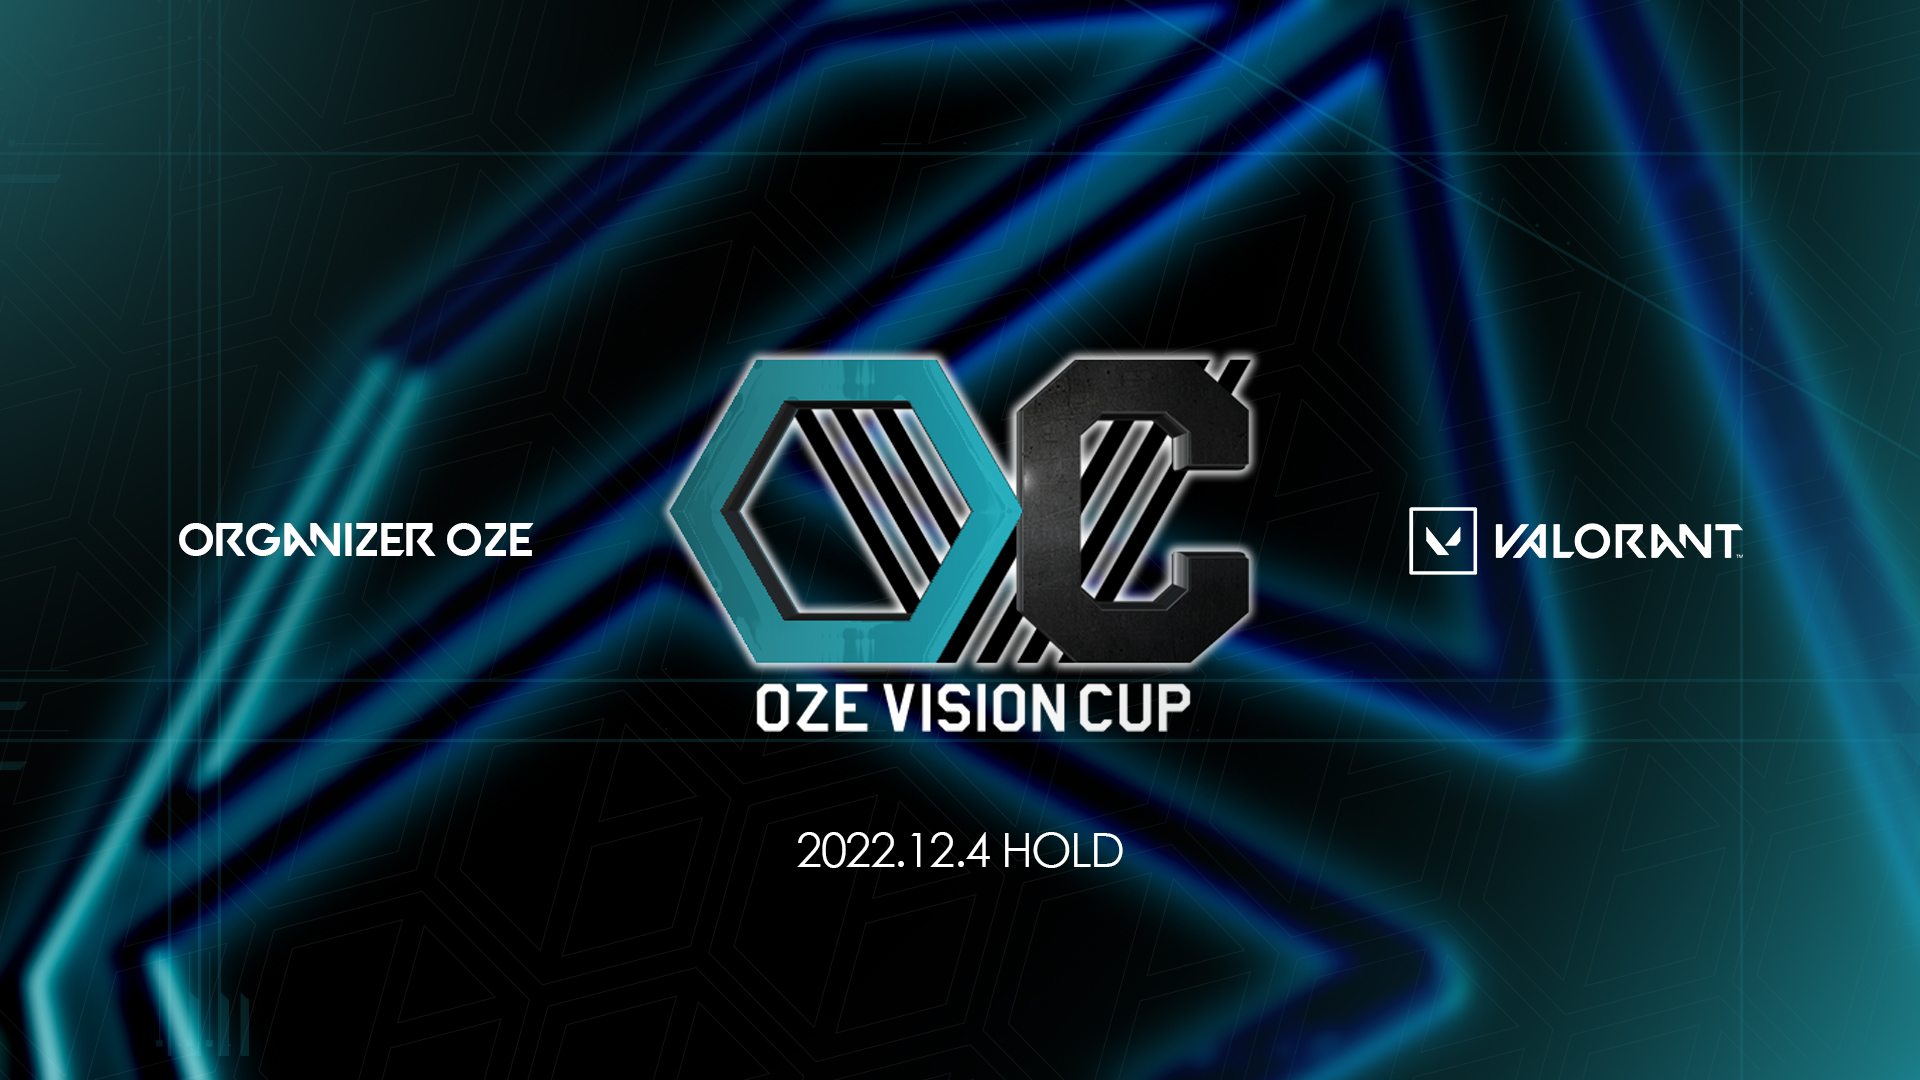 OZE VISION CUP